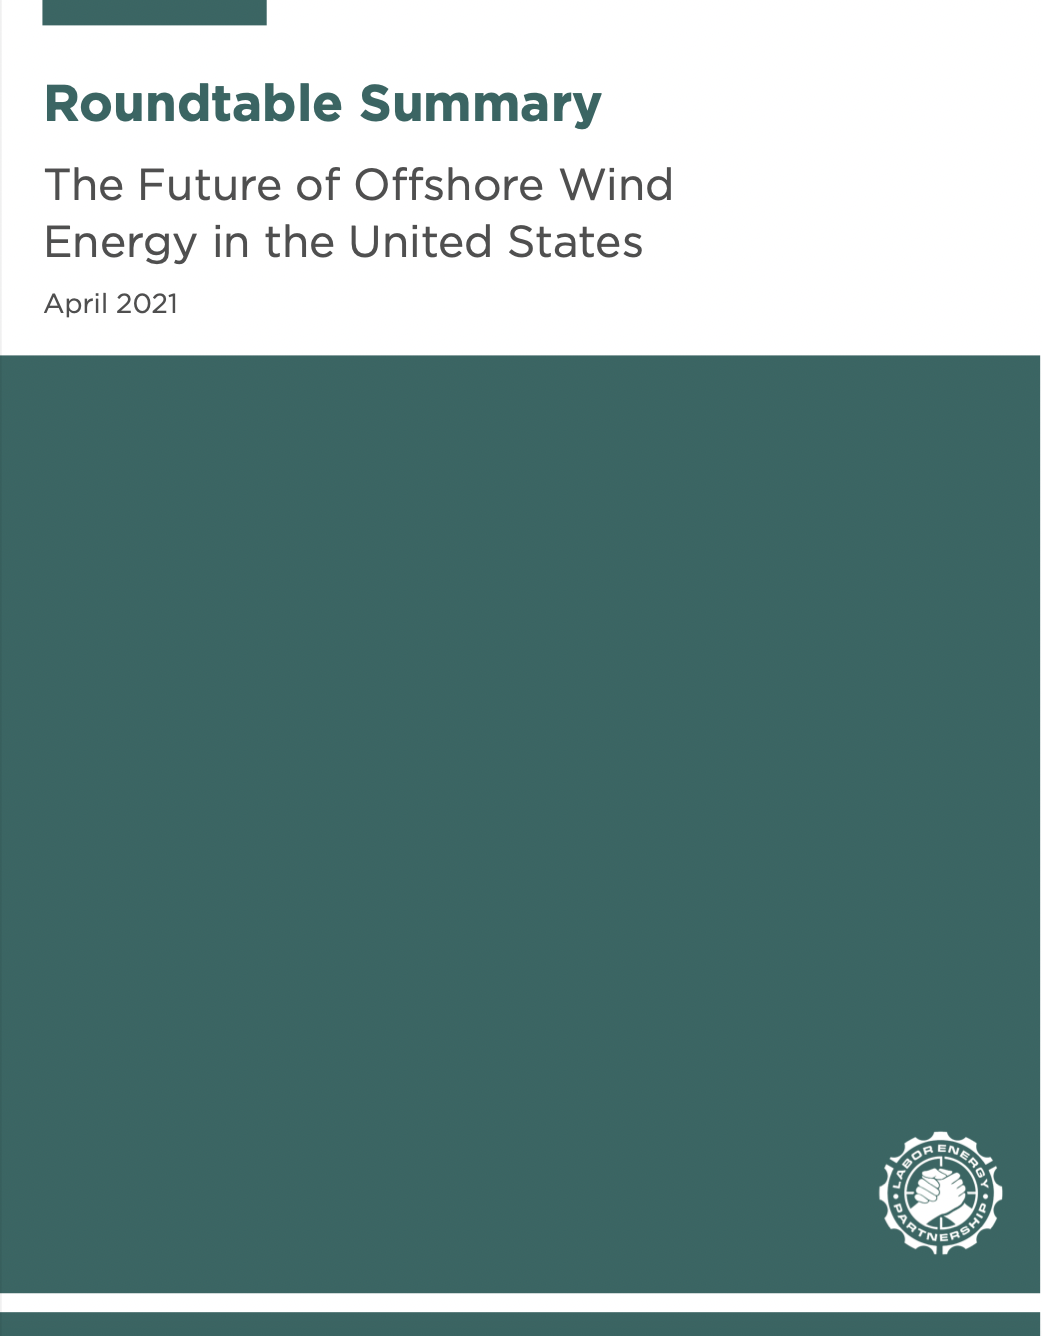 Cover of The Future of Offshore Wind report.